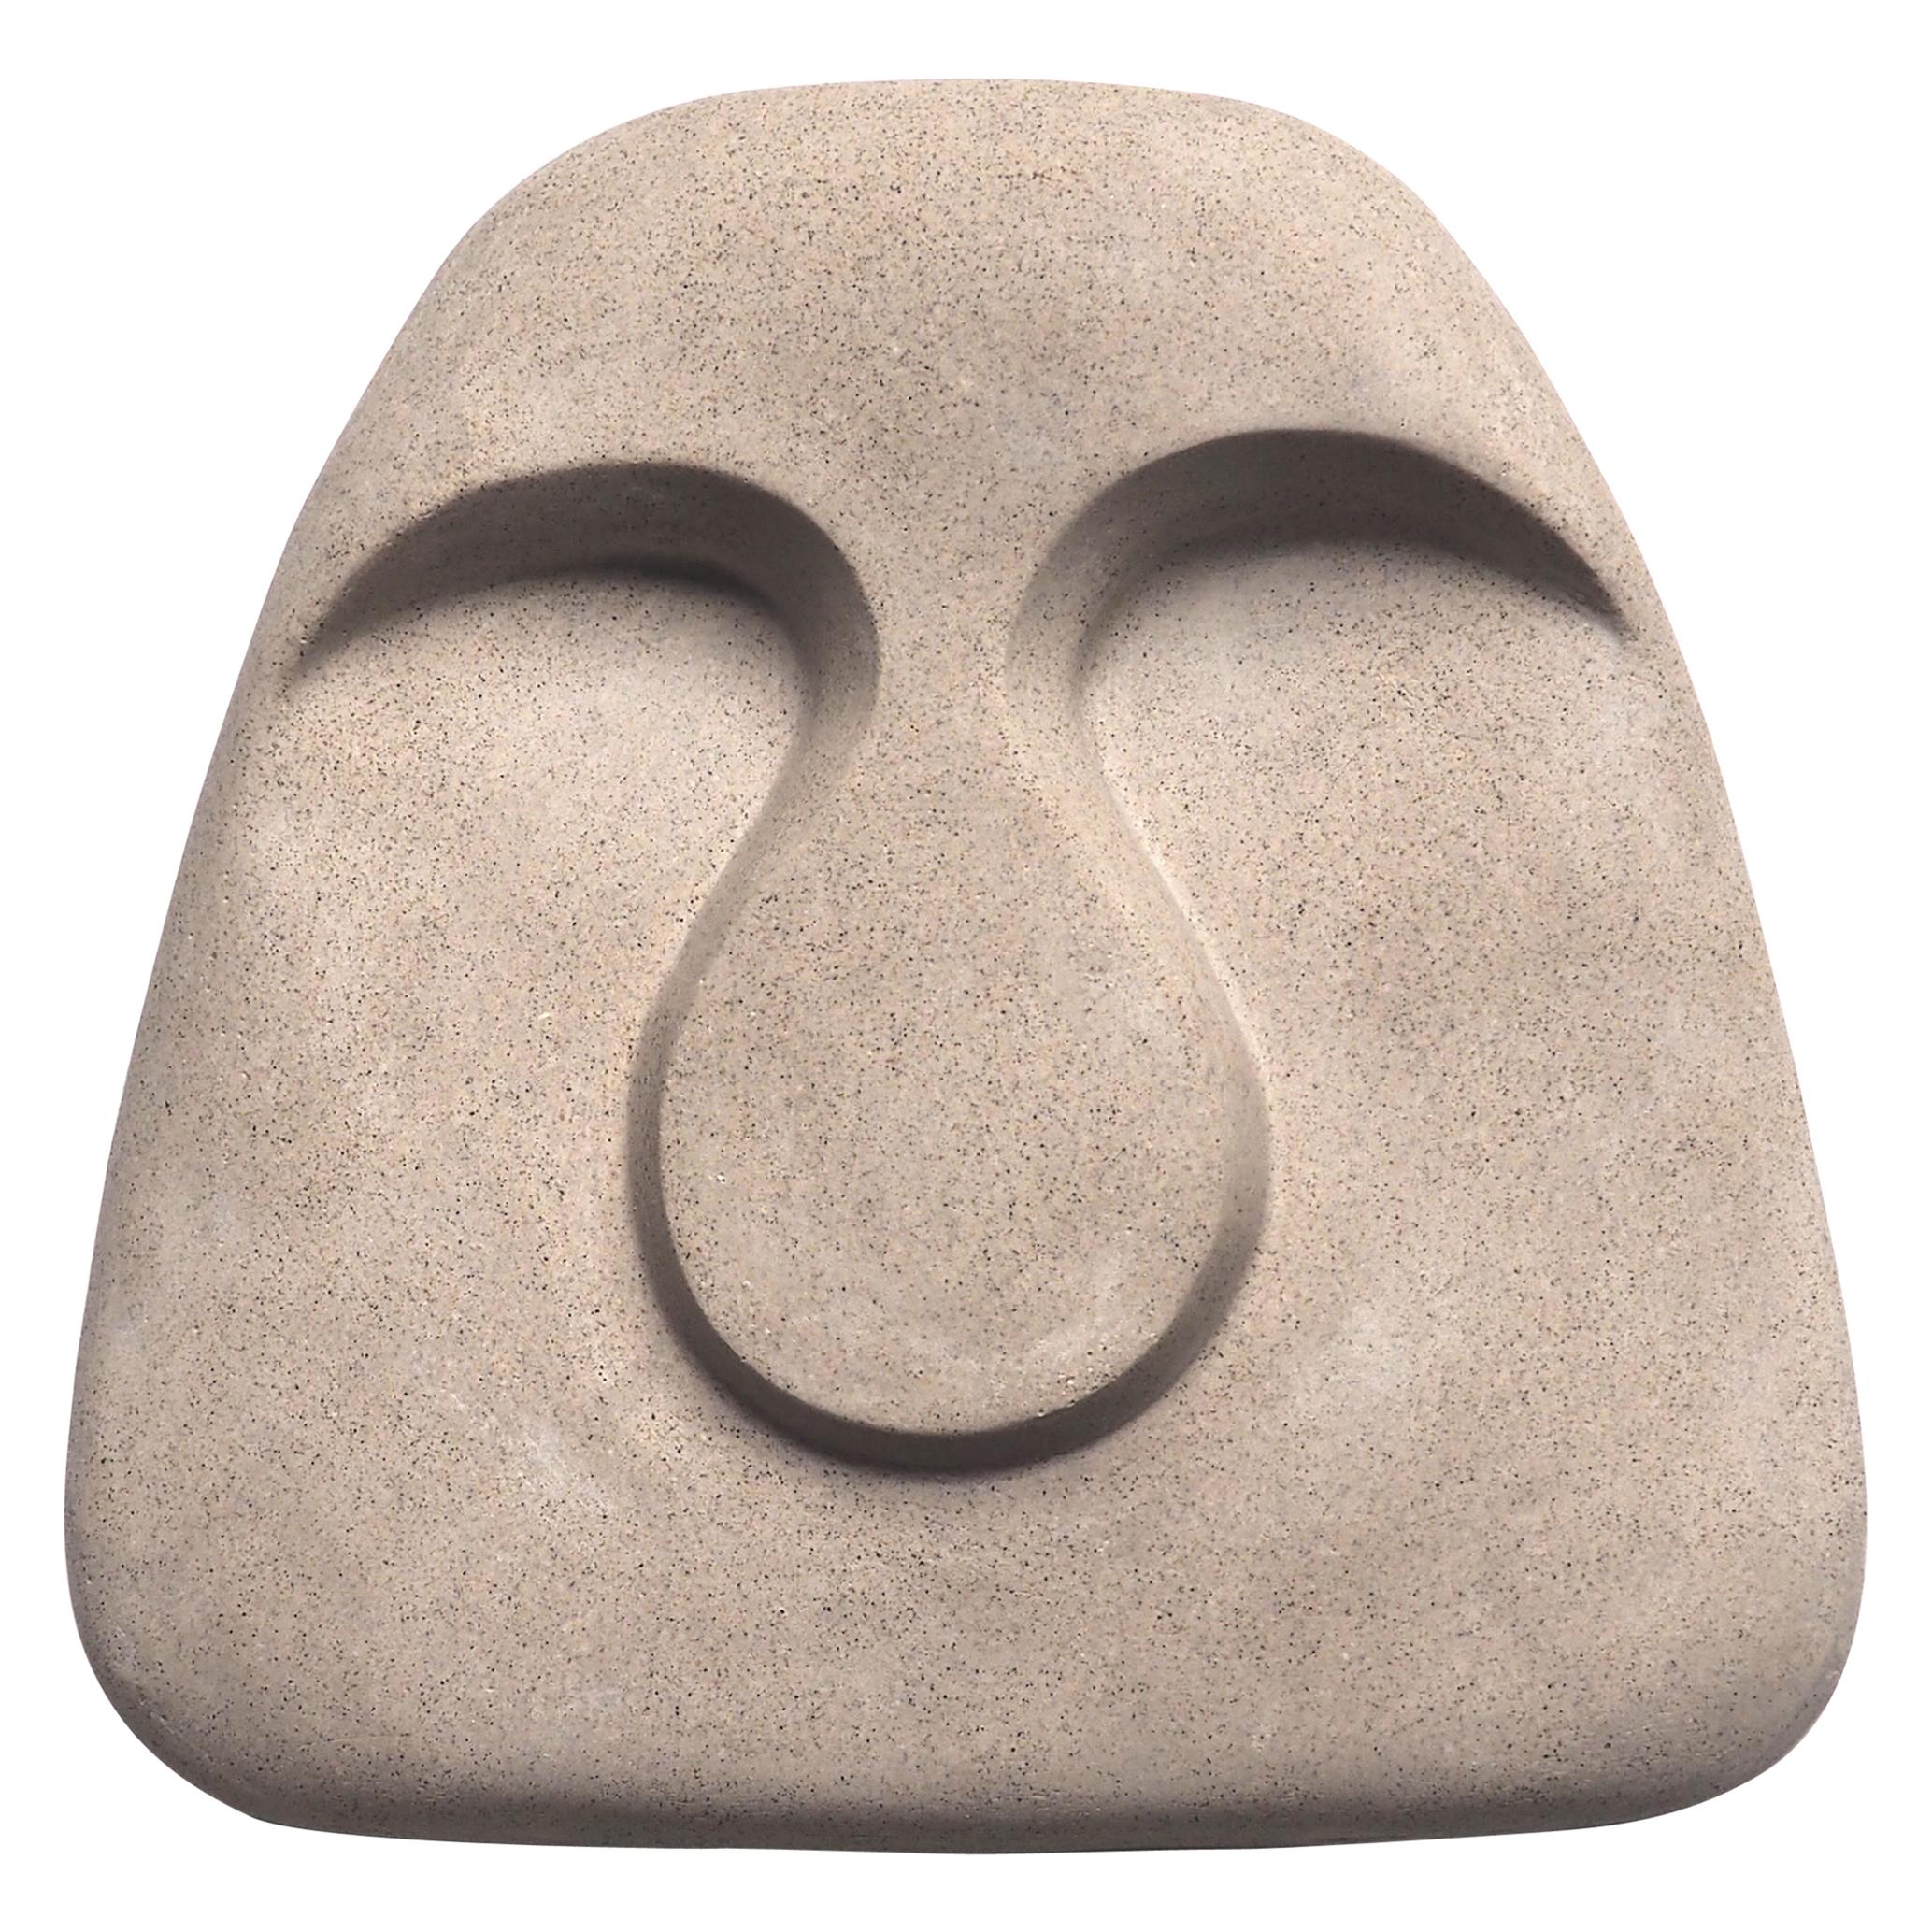 Idoli Mask Plaster Wall Sculpture For Sale